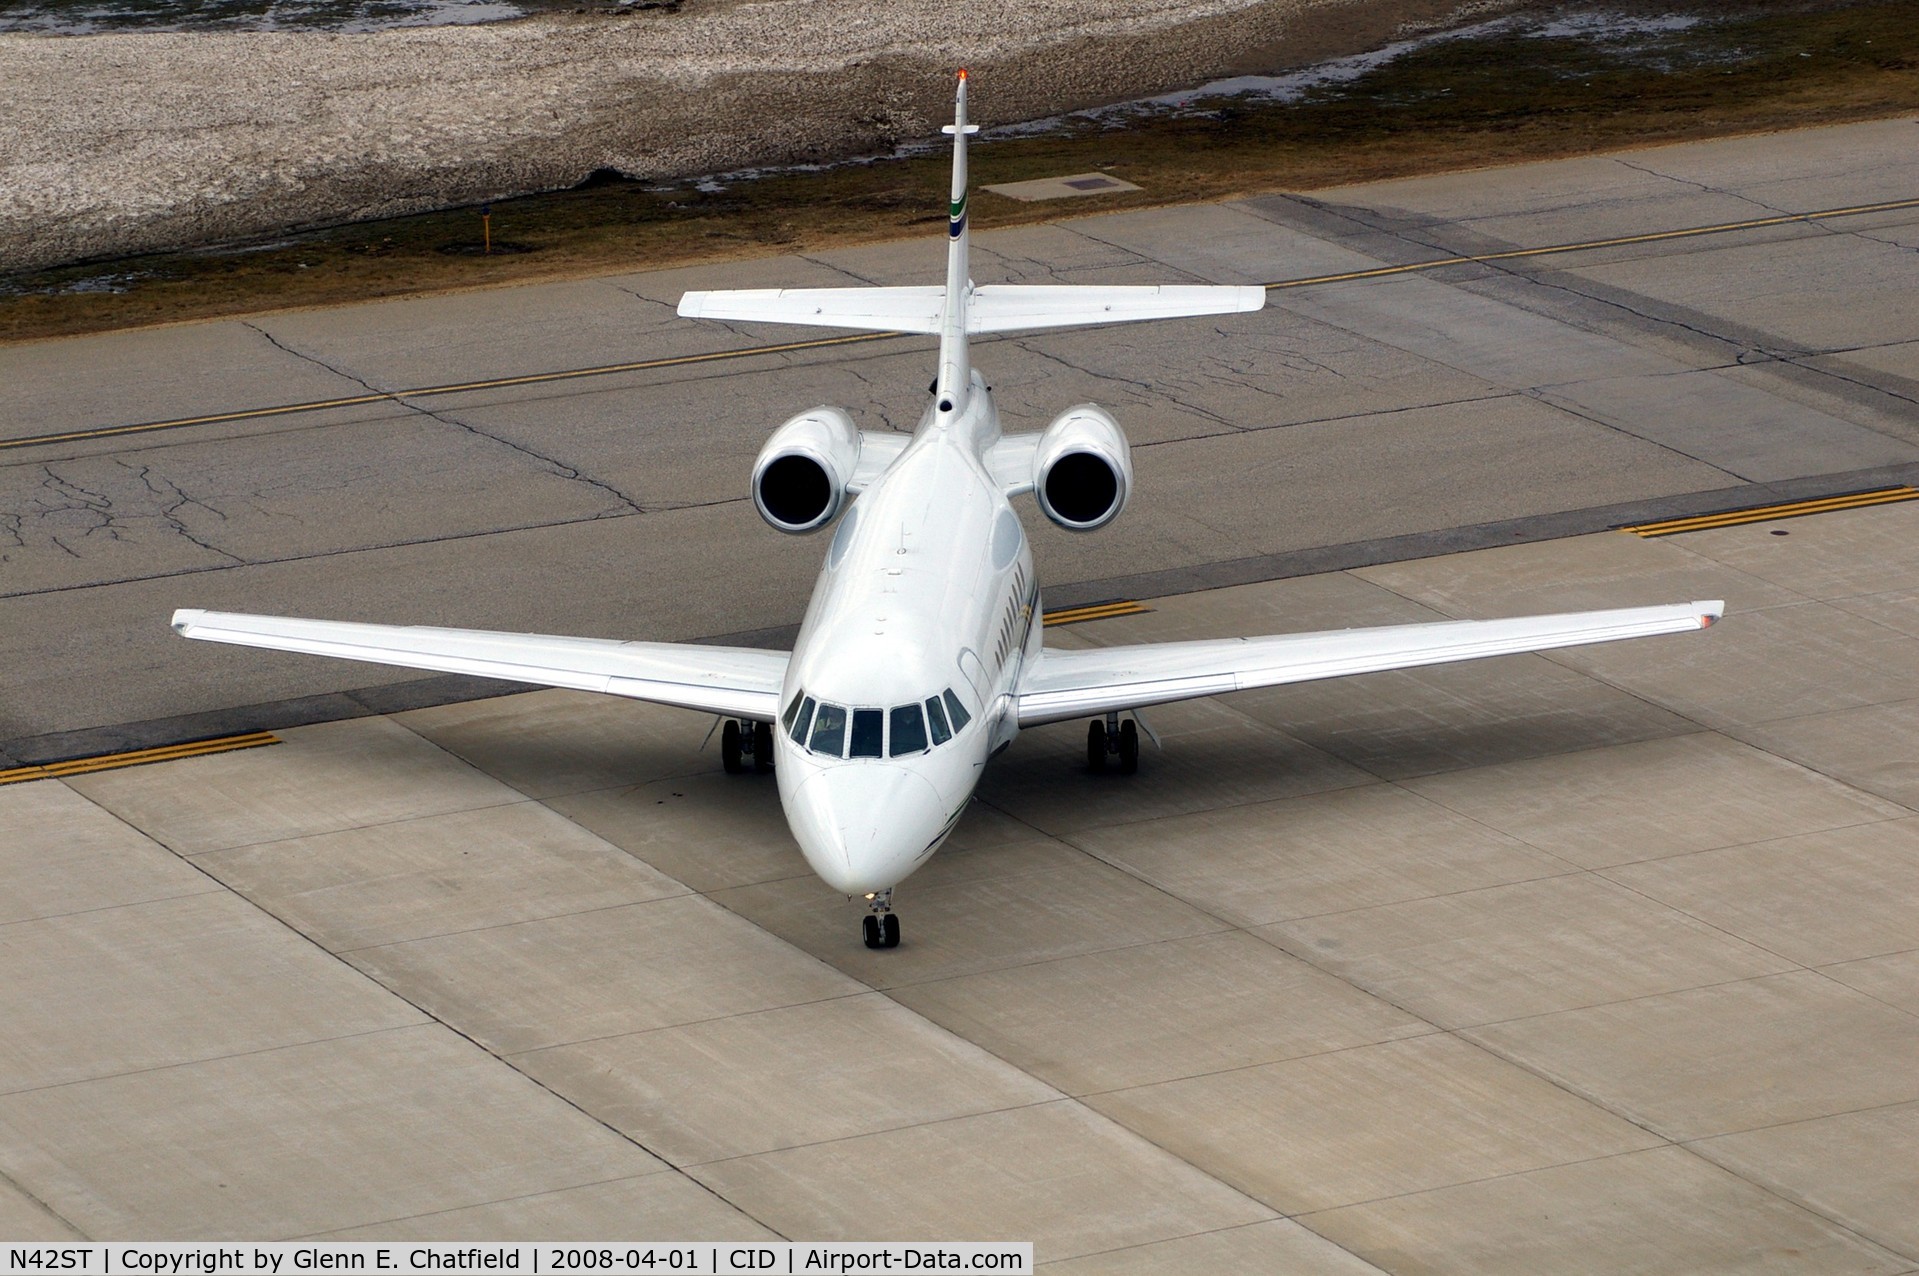 N42ST, 1996 Dassault Falcon 2000 C/N 39, Turning into the parking spot at Landmark